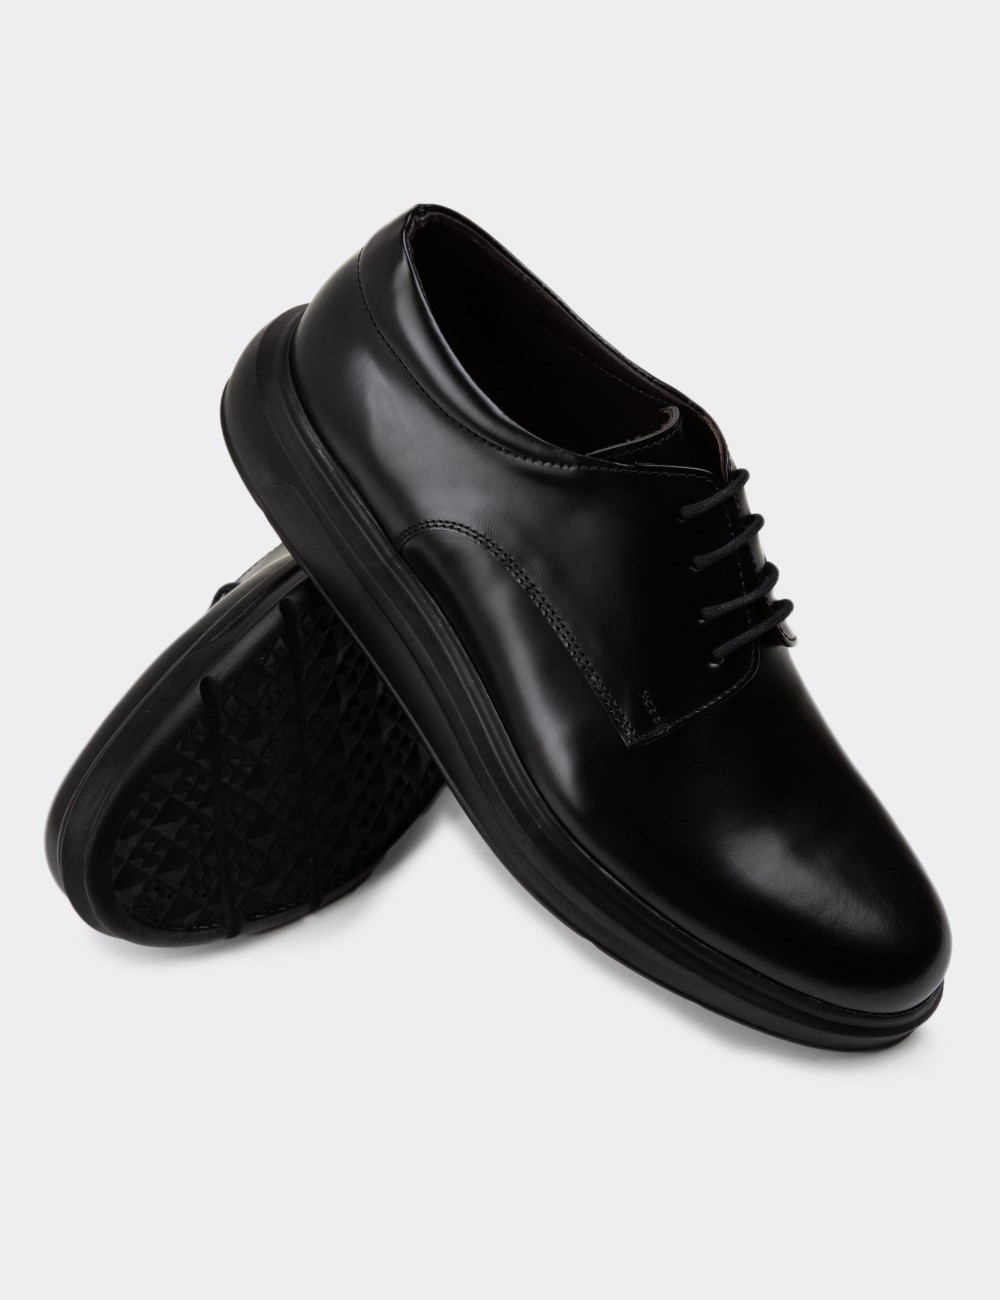 Black Leather Lace-up Shoes - 01934MSYHP04